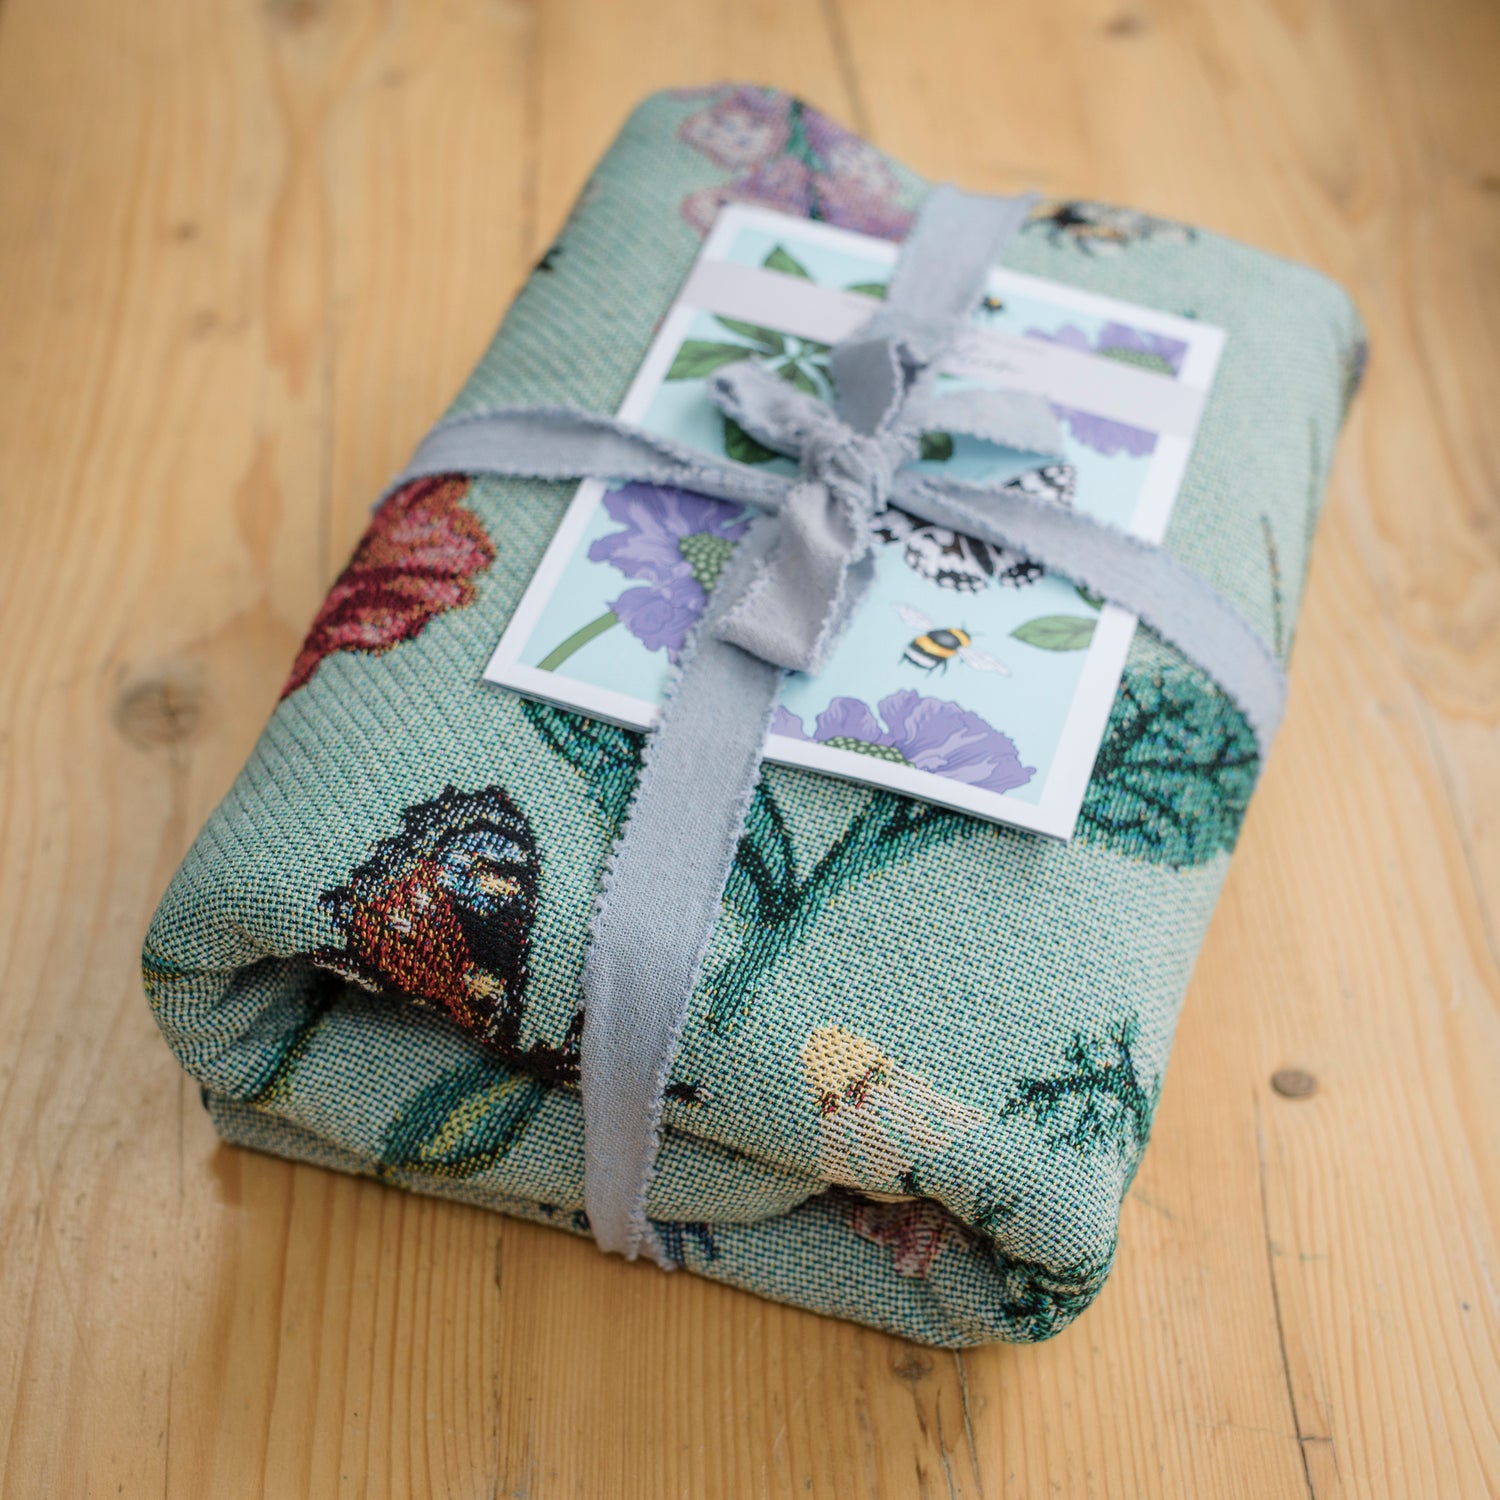 folded woven green blanket with butterfly and flower patterns tied with ribbon and guide book